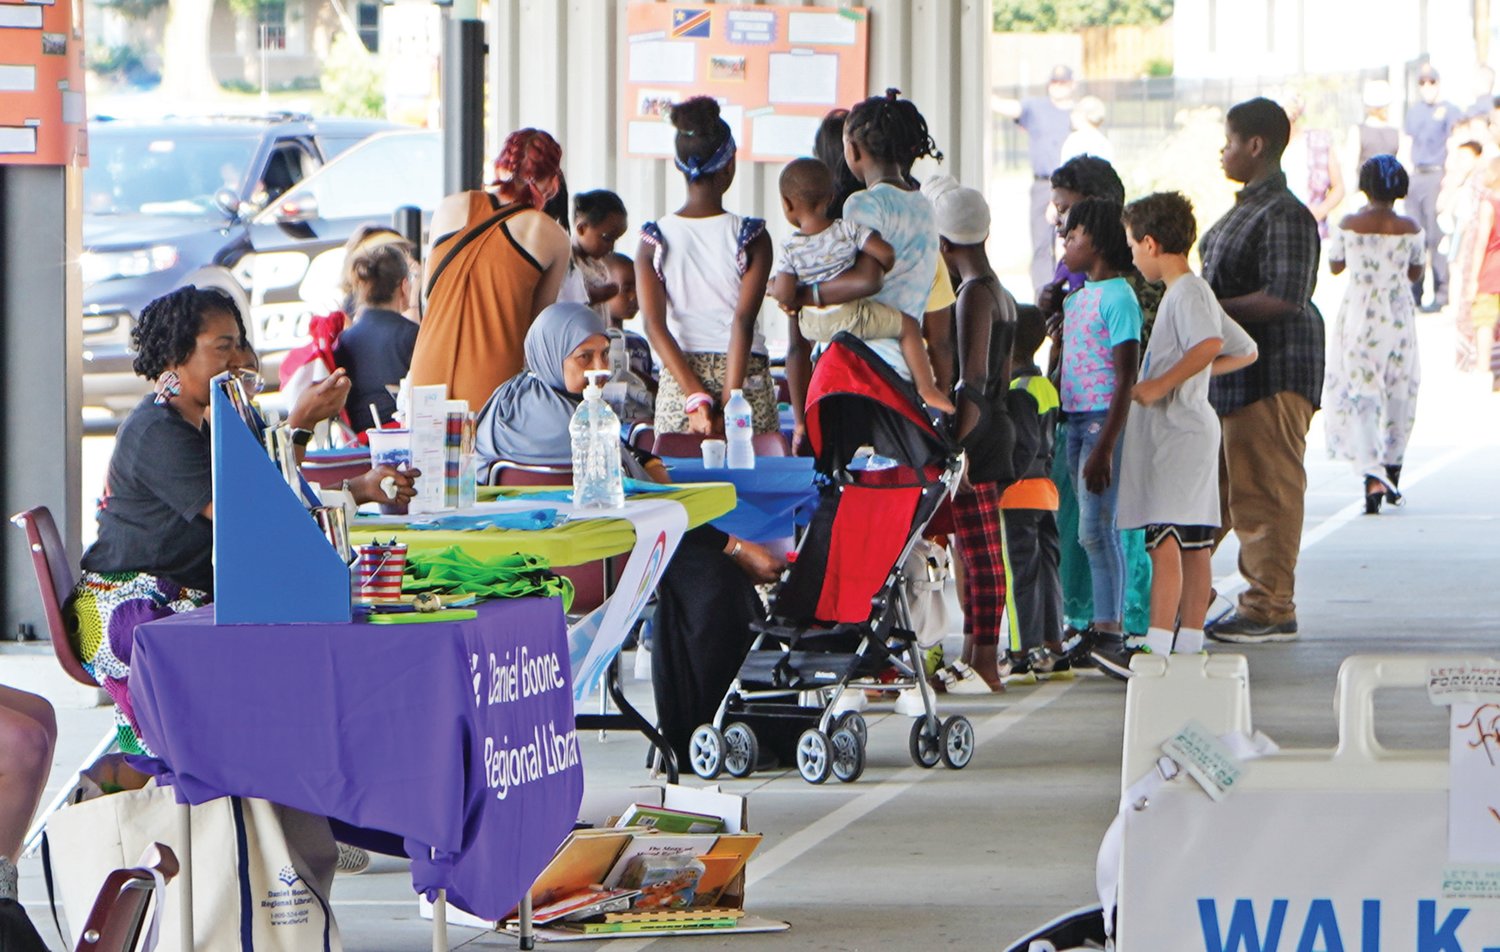 Participants in the 2021 World Refugee Day celebration gather around tables and booths under the MU Healthcare Pavilion in Clary-Shy Park in Columbia. The theme for the event was “Together, we heal, learn and shine.”